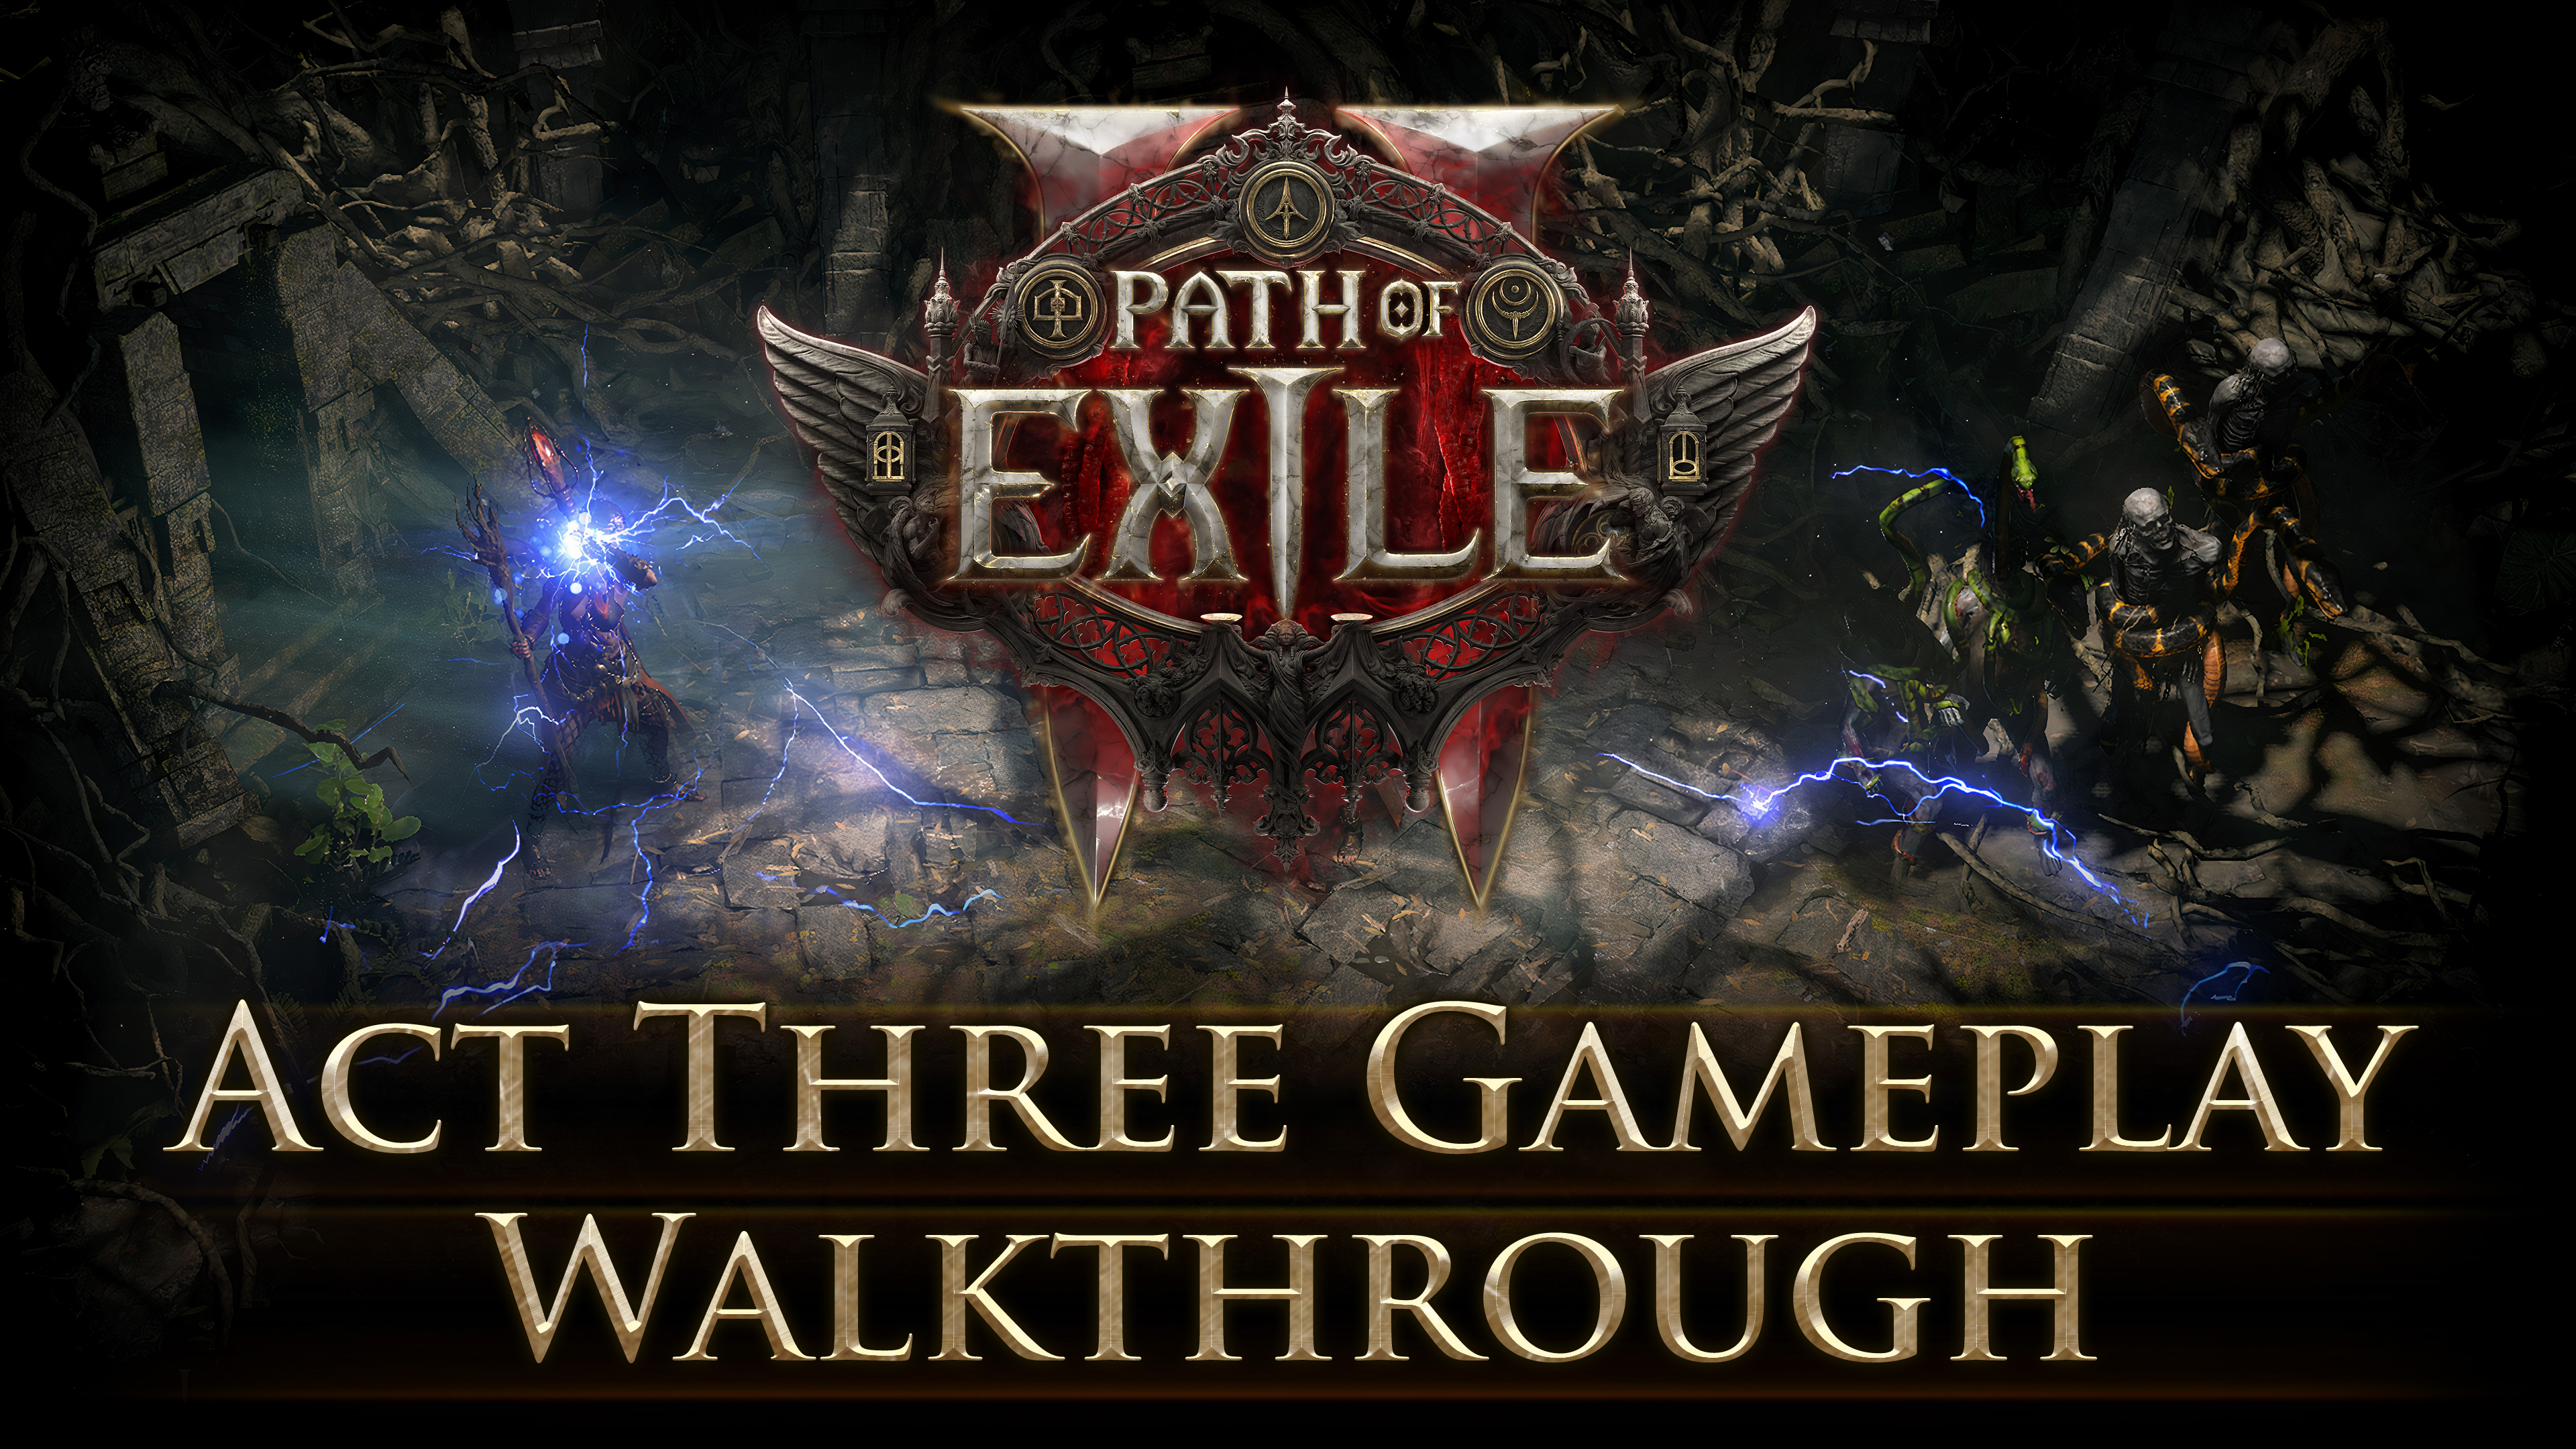 Path of Exile on Steam